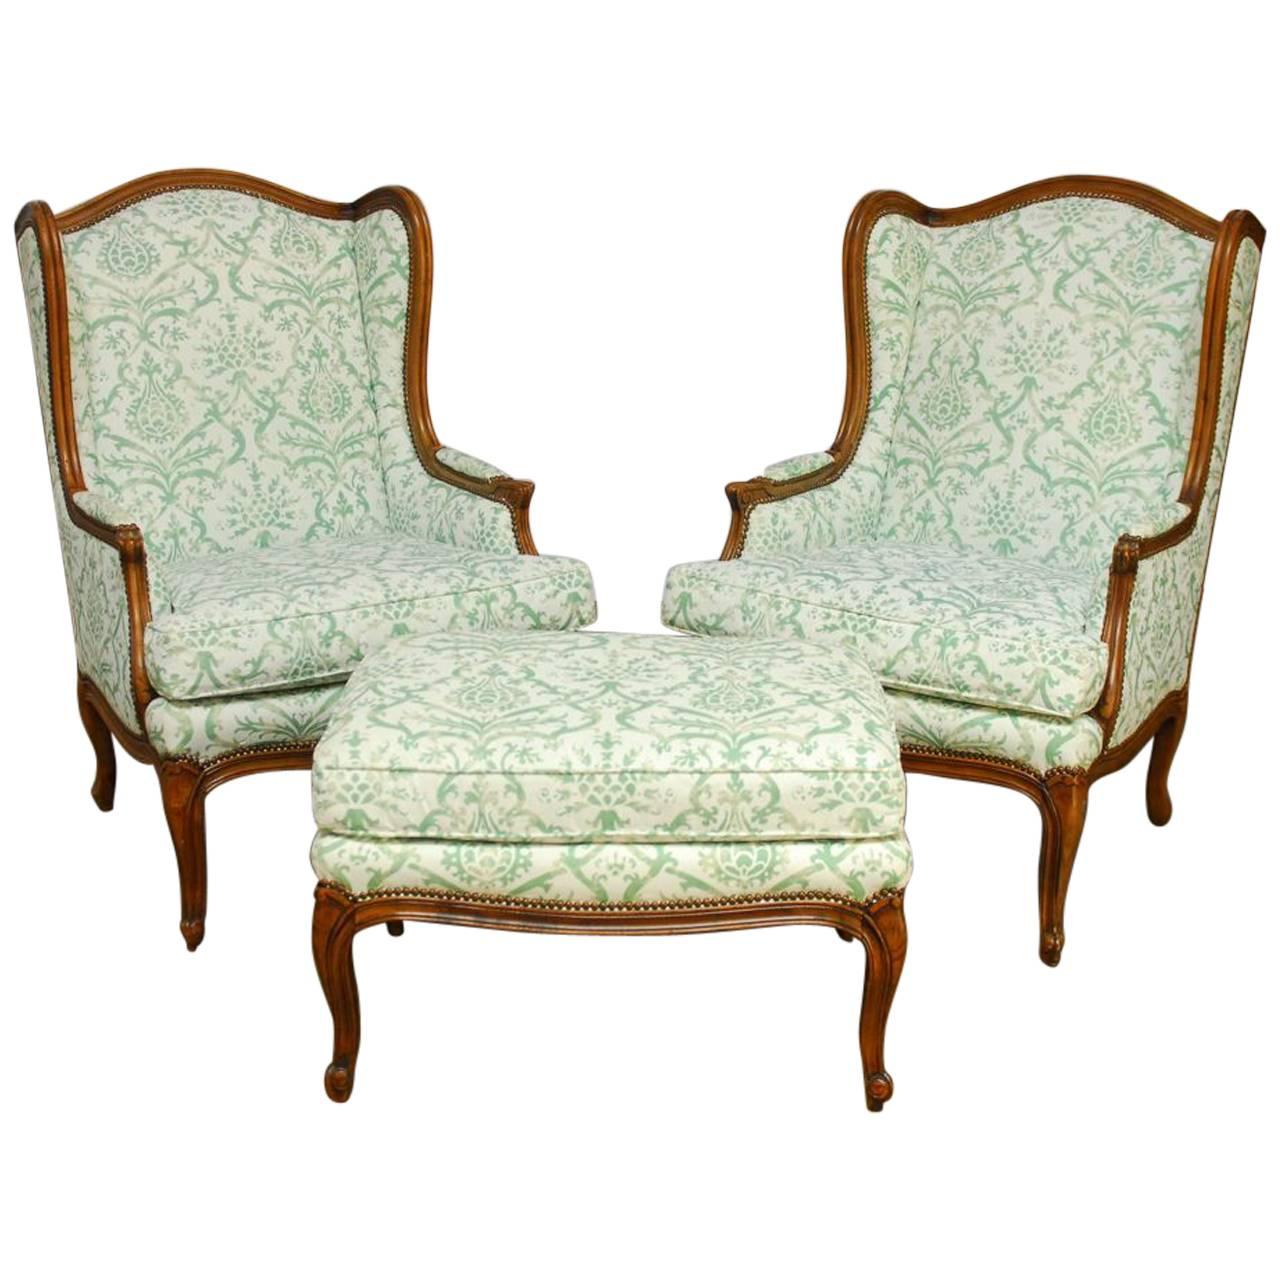 Pair of Baker Wingback Chairs with Fortuny Upholstery